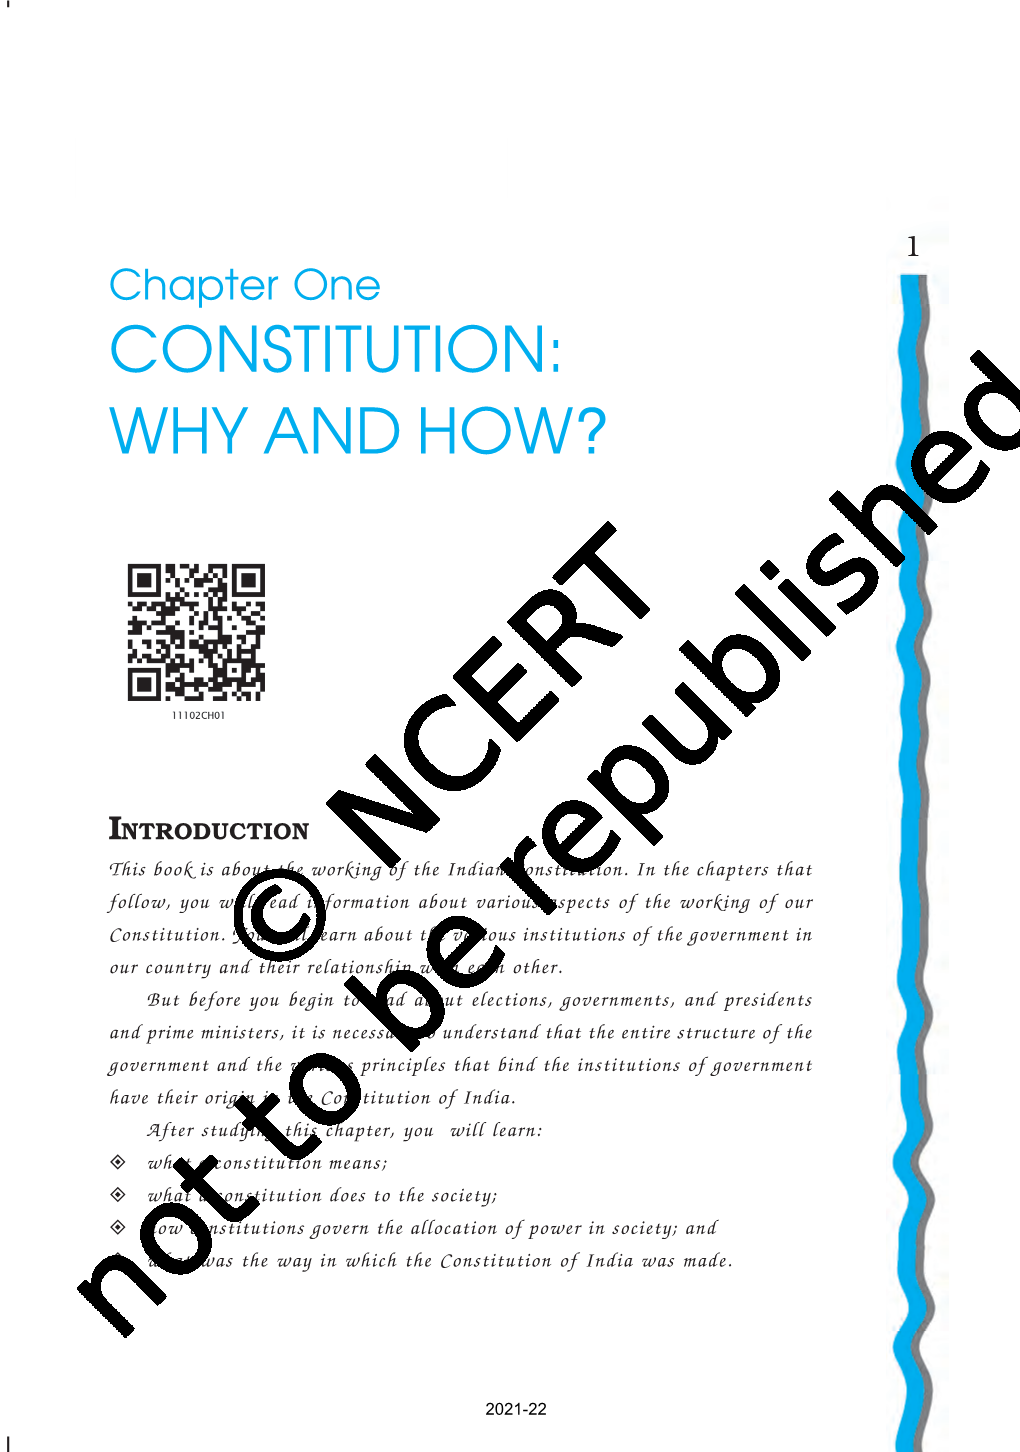 Constitution: Why and How?